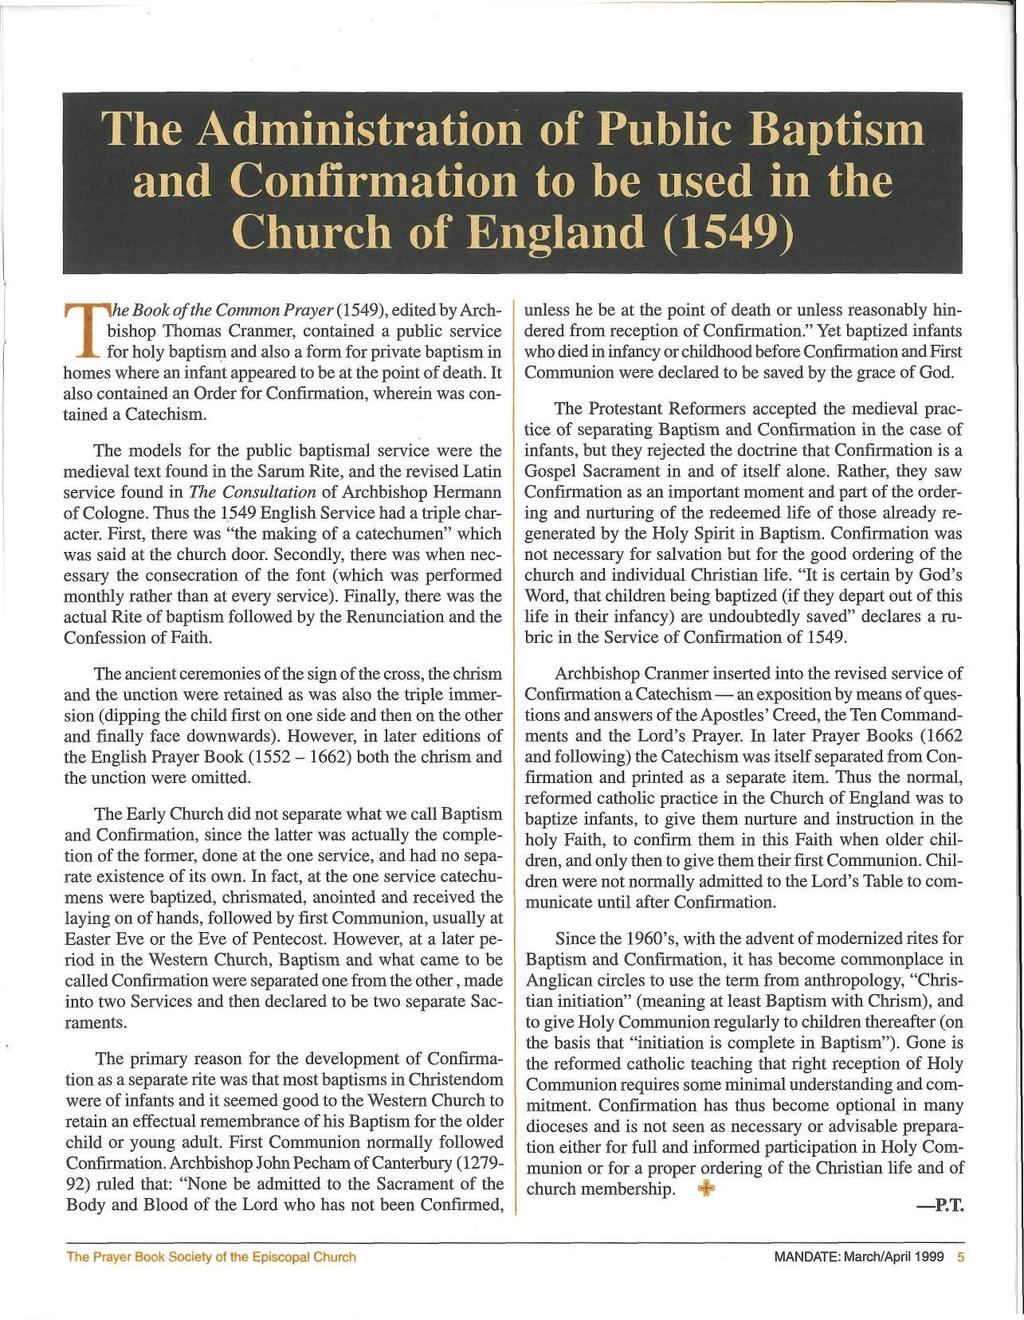 The Ad ic Baptism and Confirmation to be used in the Church of England (1549) T\he Book ofthe Common Prayer (1549), edited by Archbishop Thomas Cranmer, contained a public service for holy baptism